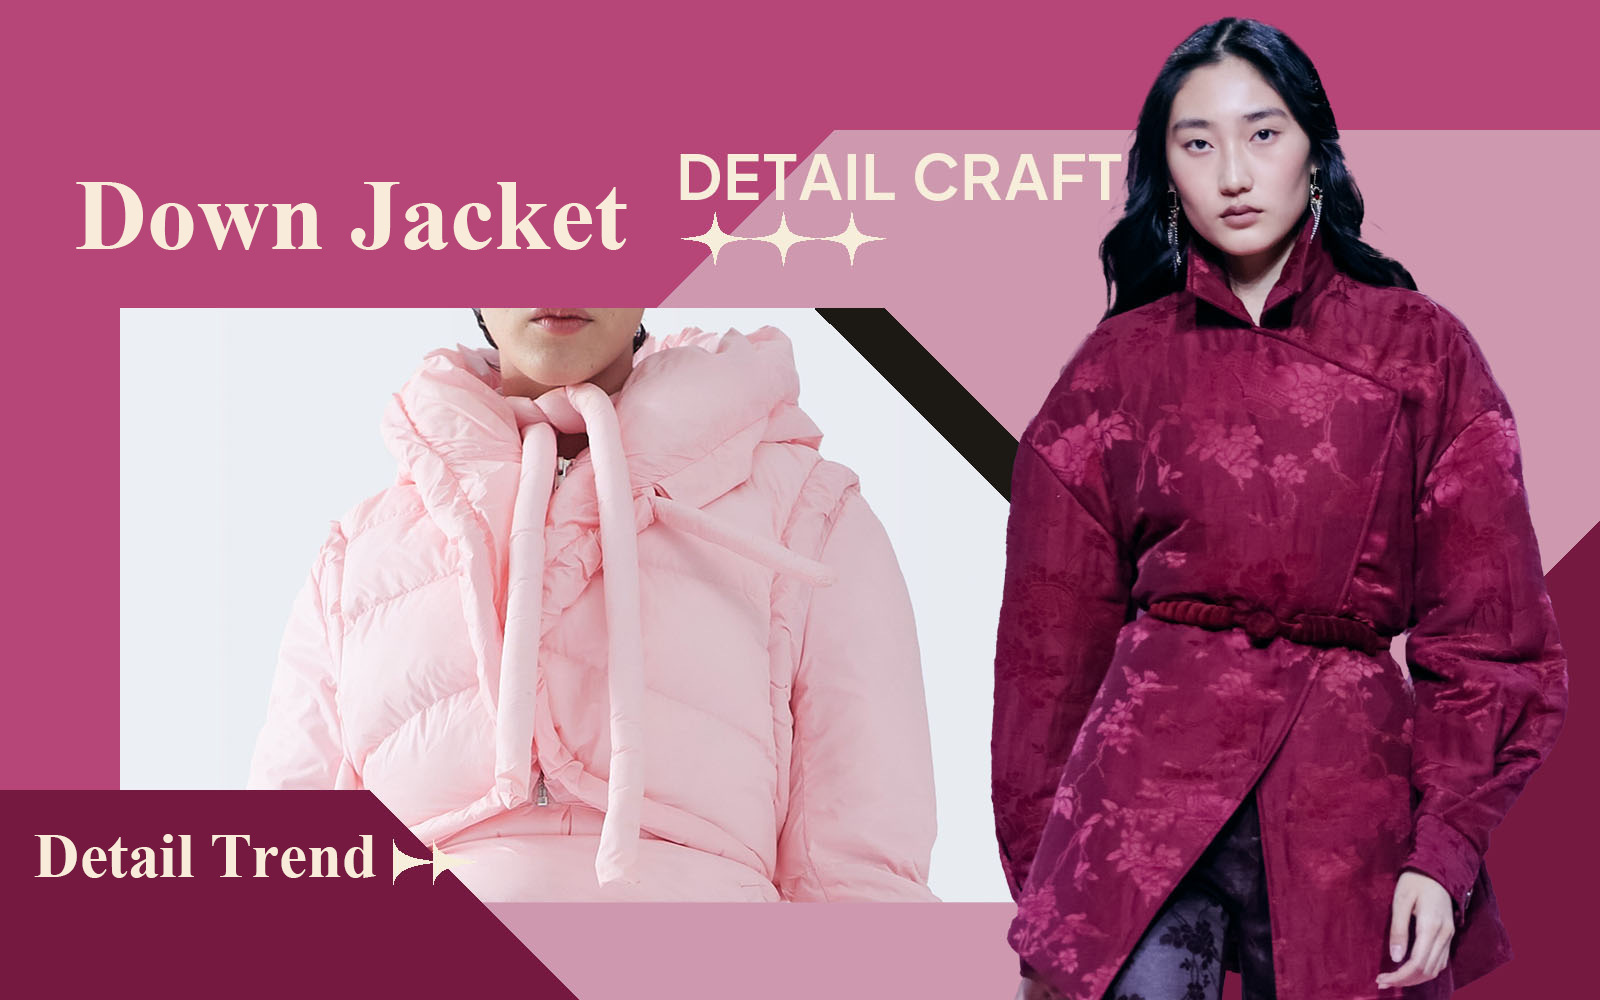 The Detail & Craft Trend for Down Jacket